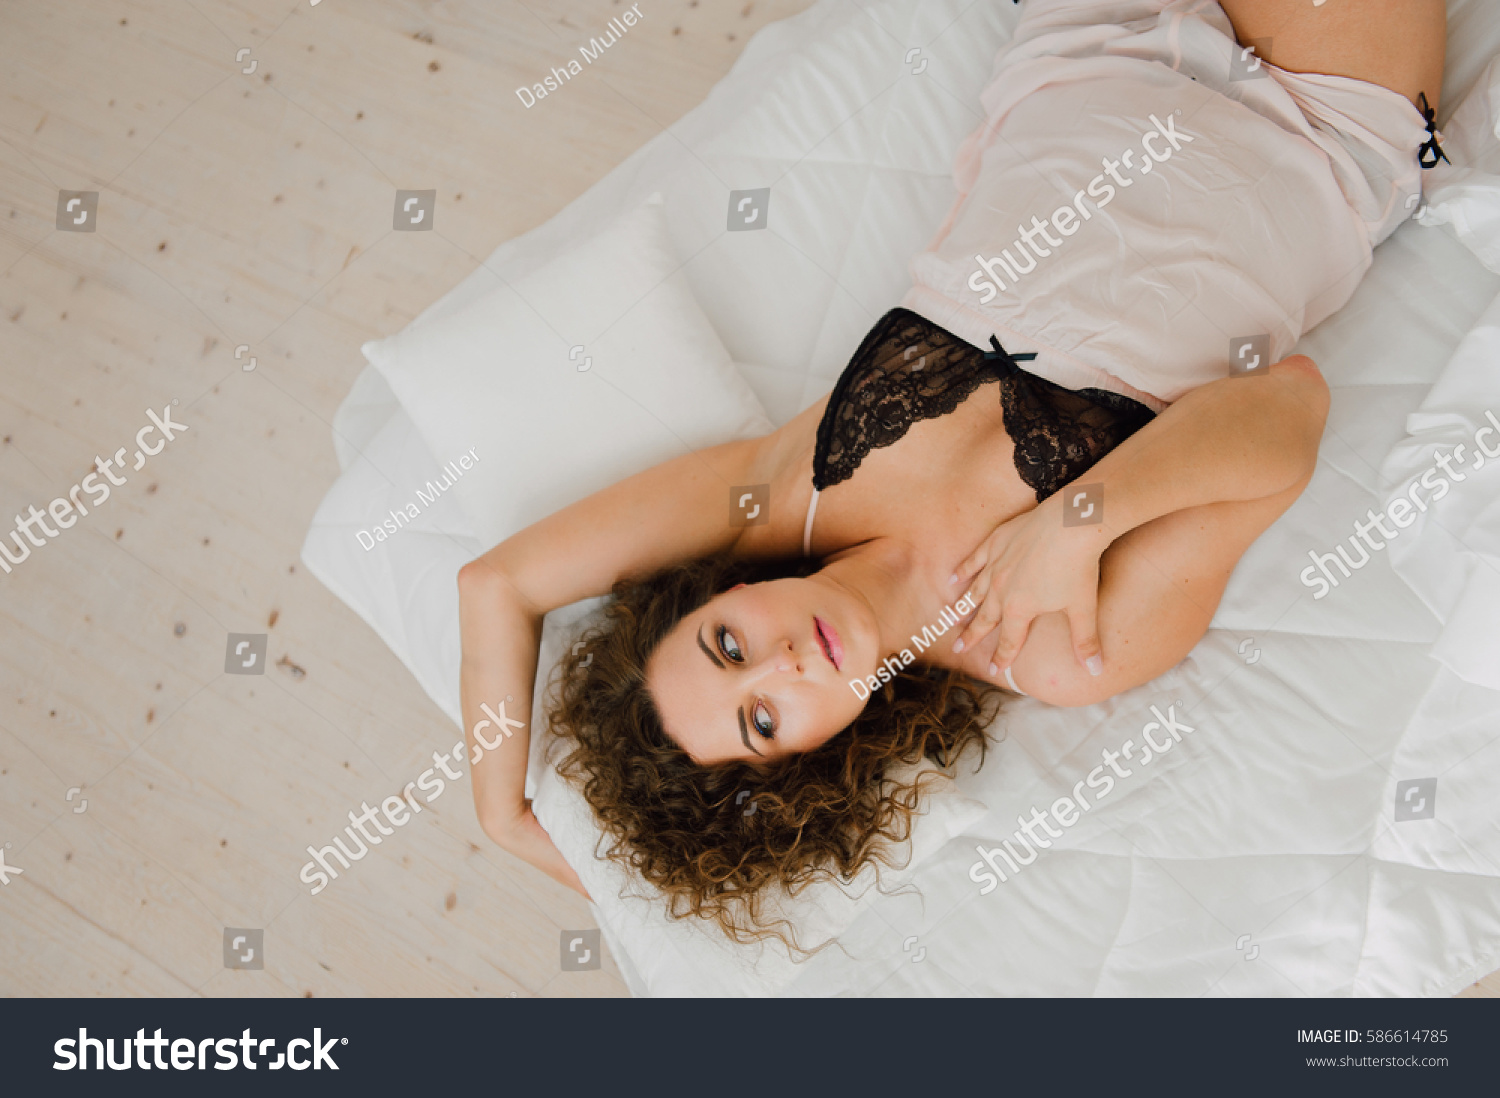 Sexy Woman Bed Morning Showing Her Stock Photo Shutterstock